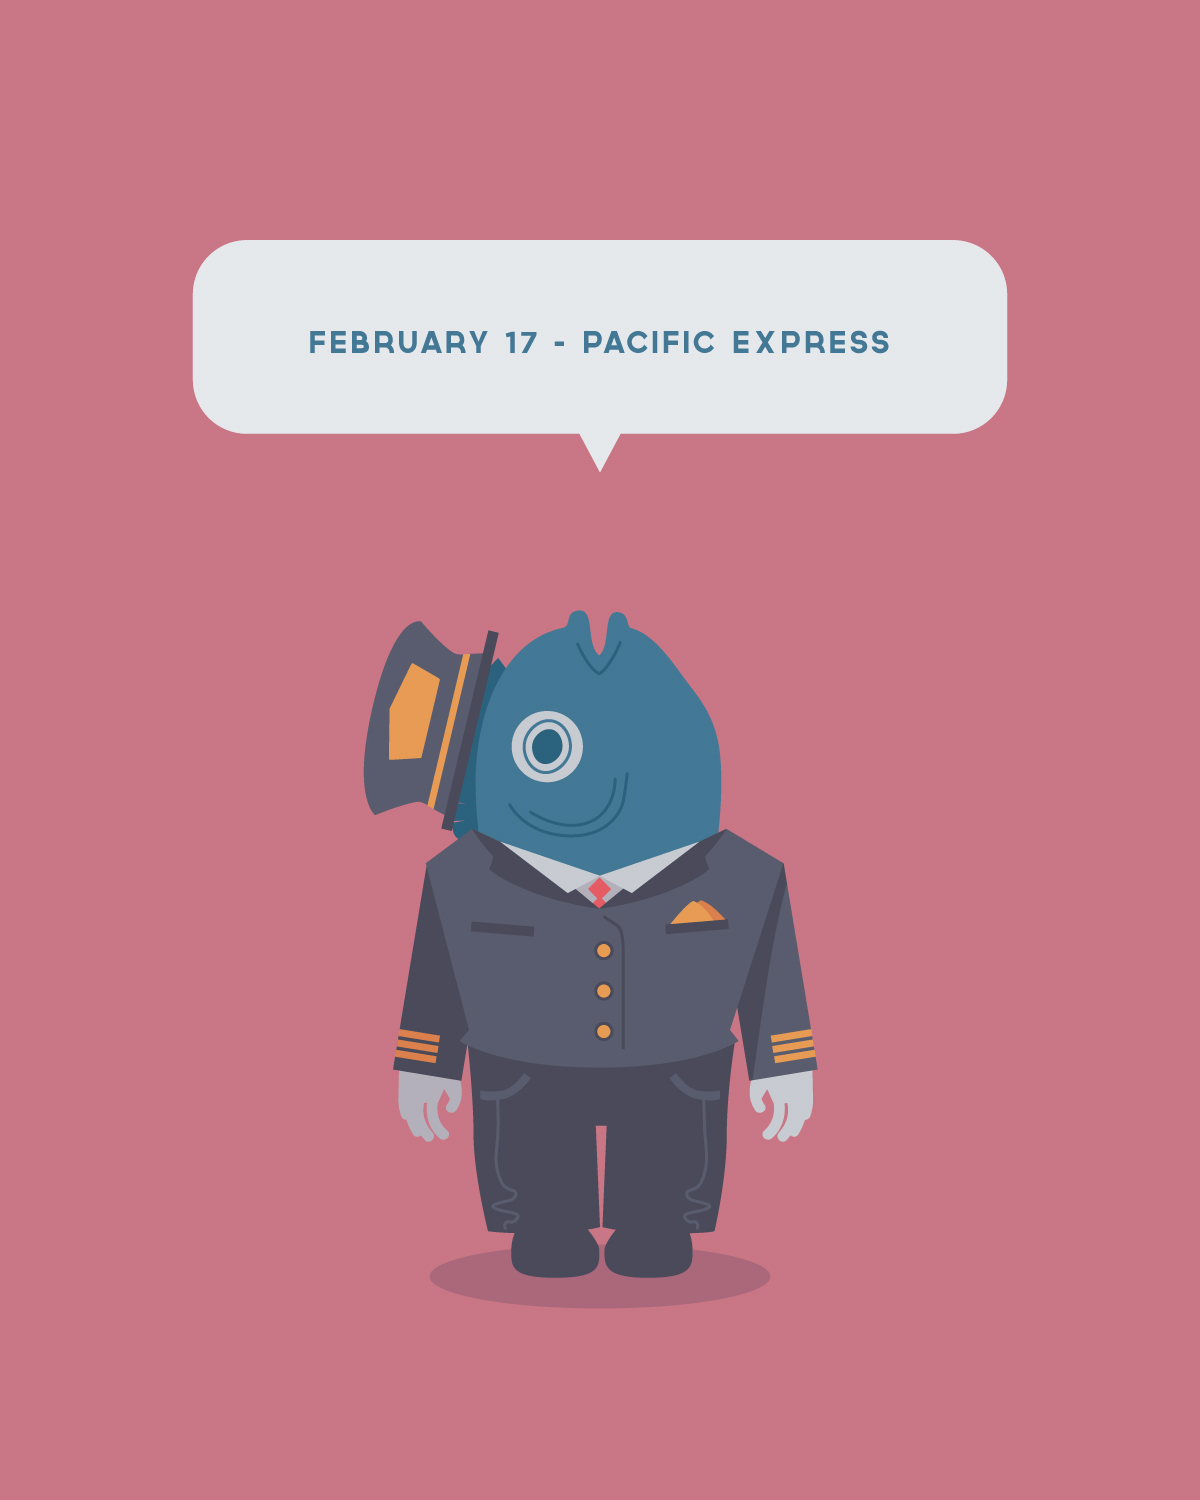 Day 7, February 17: Pacific Express